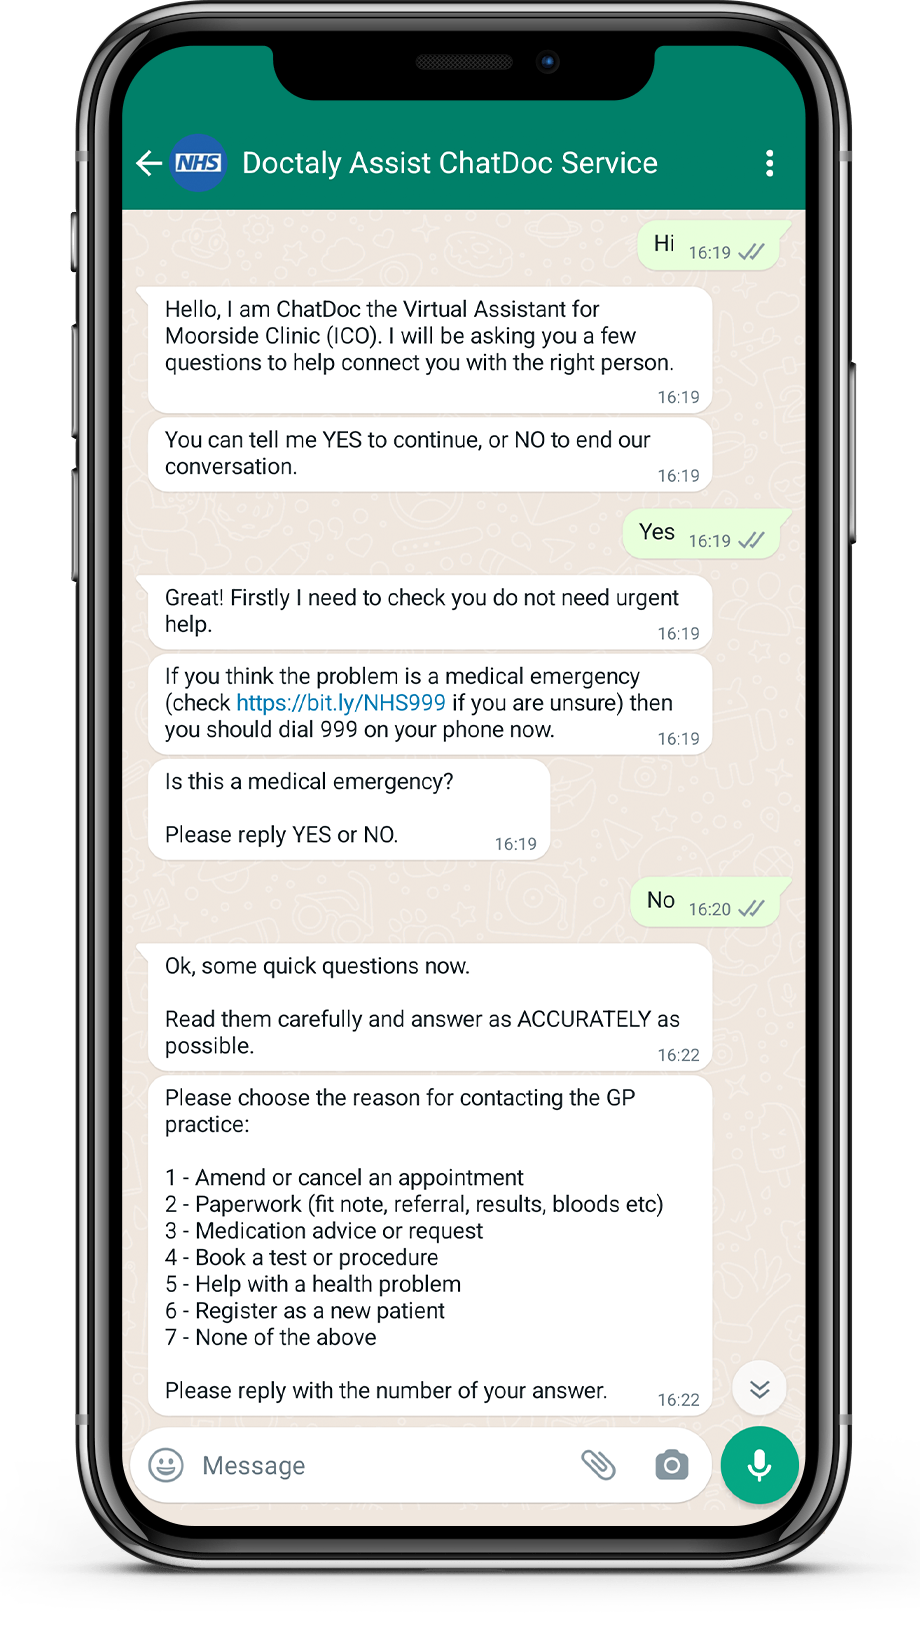 A ChatDoc consultation on over WhatsApp, on a mobile phone